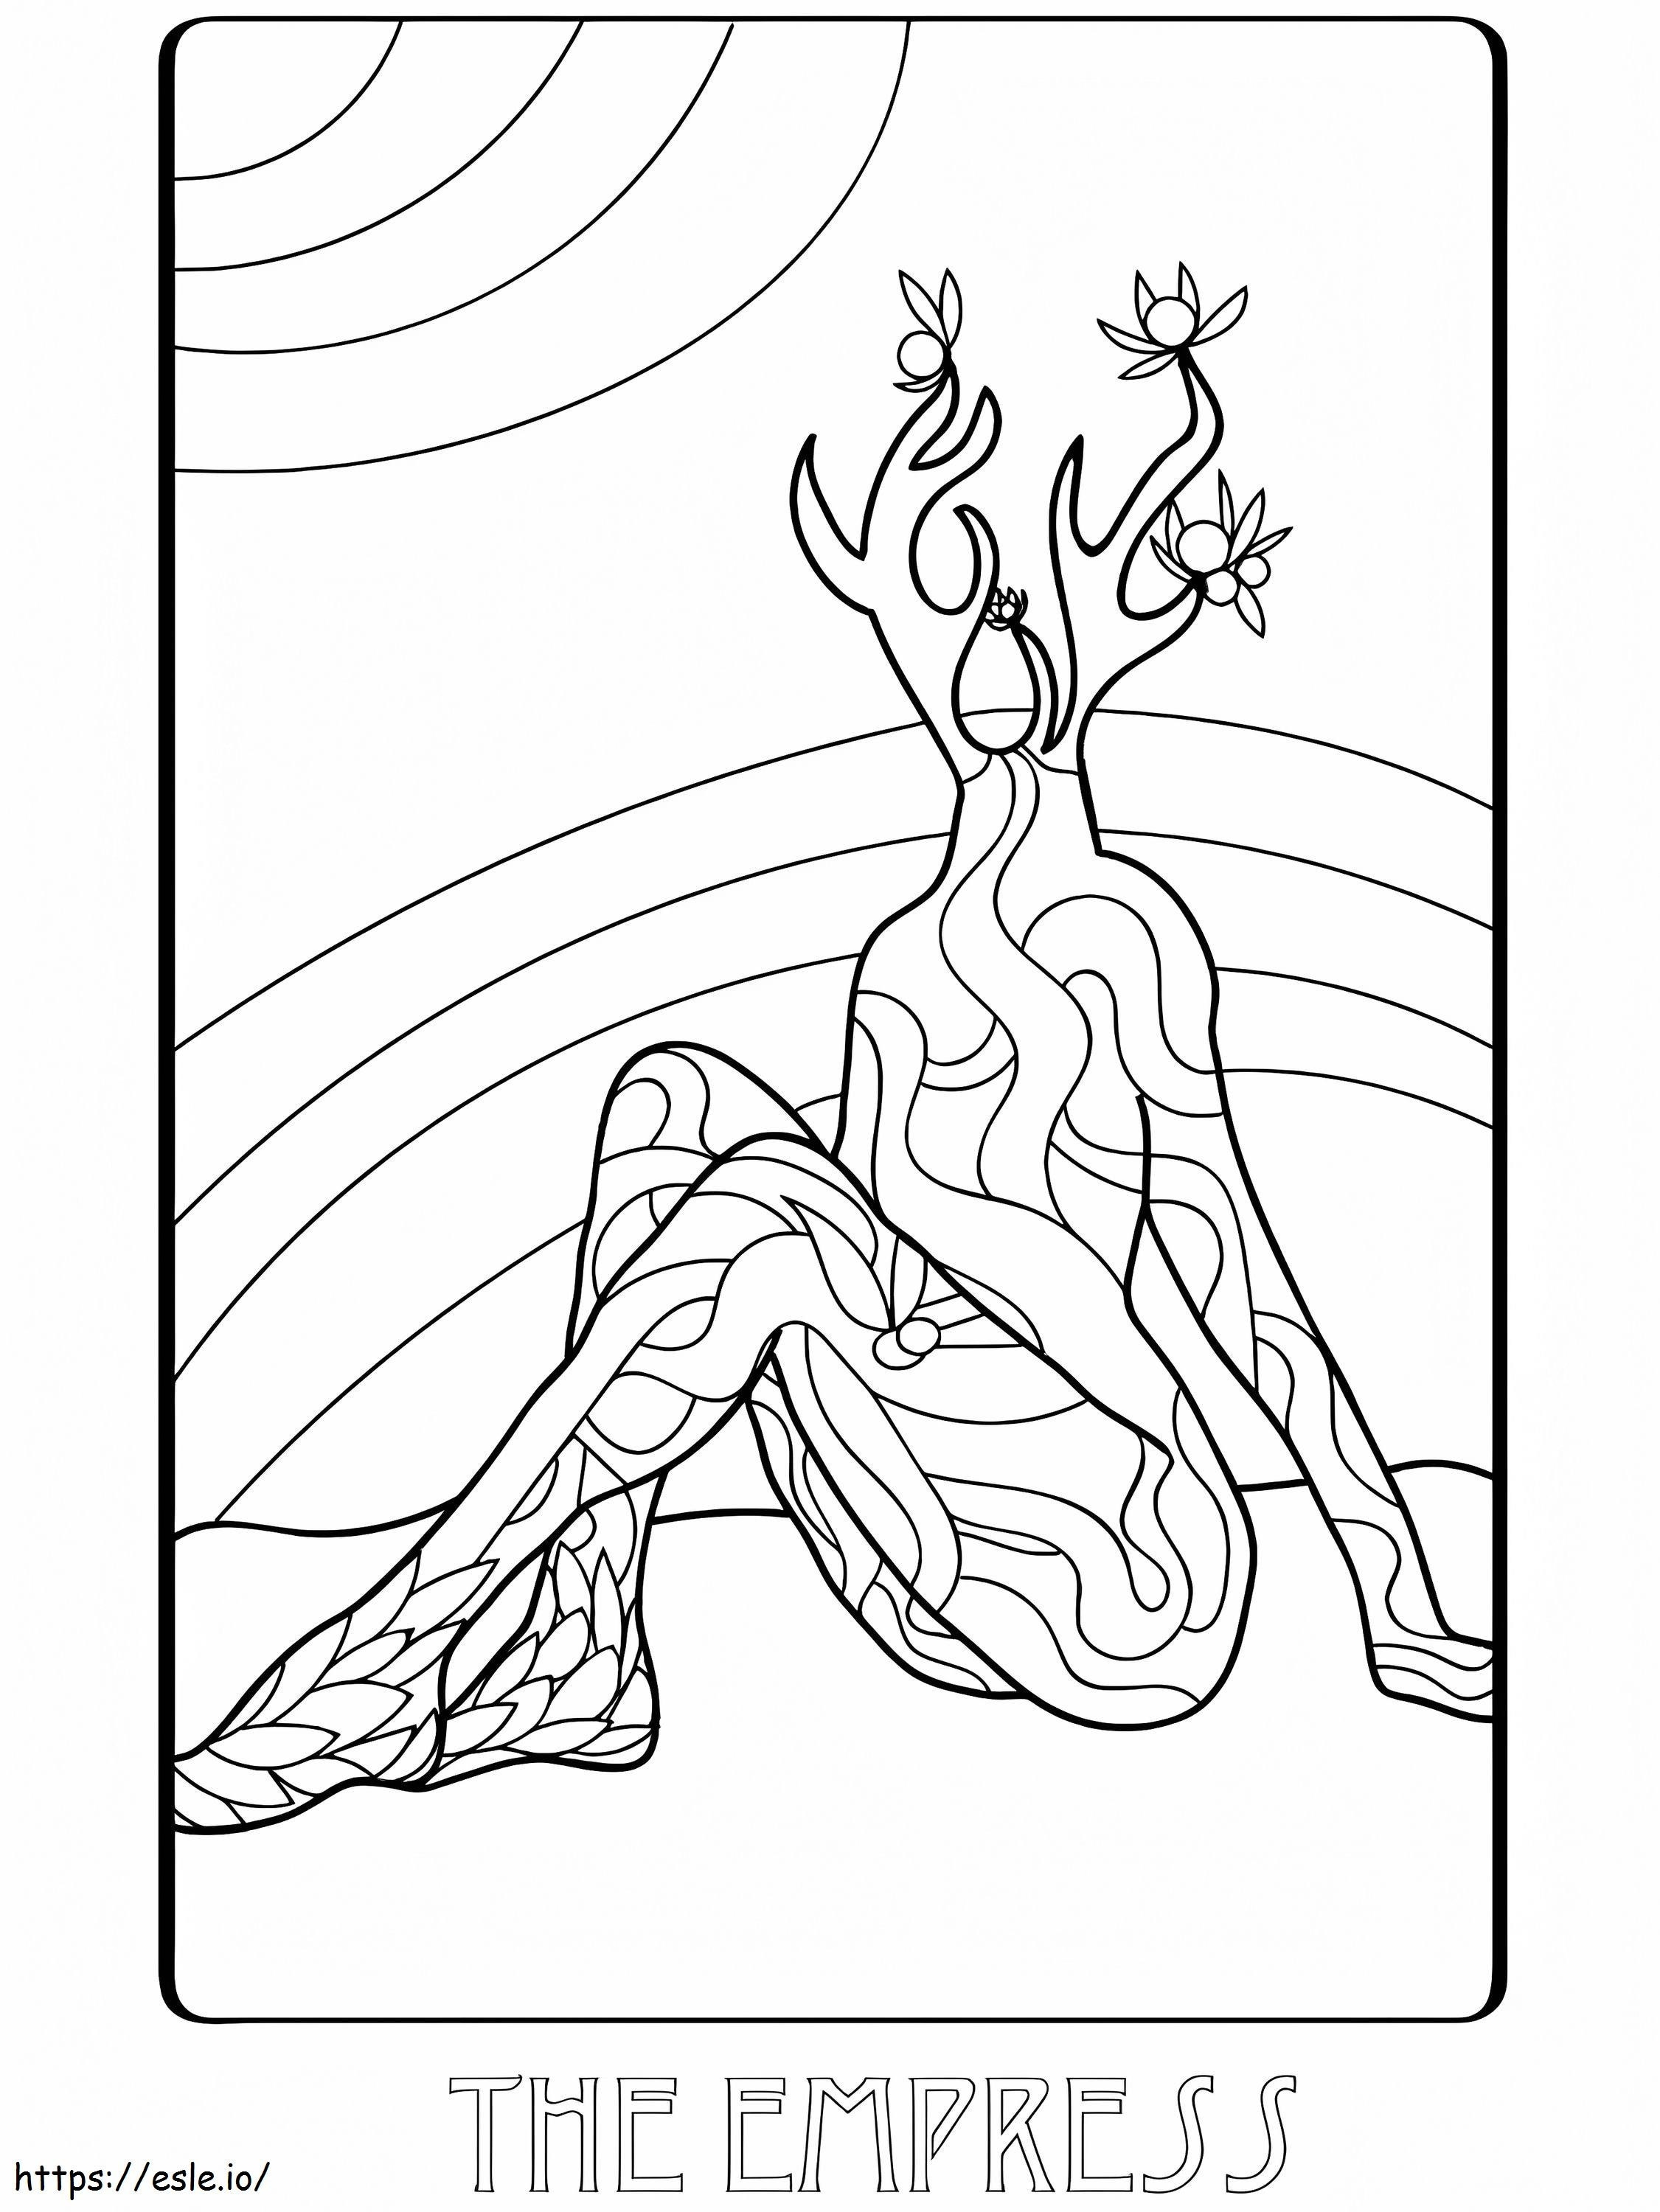 Tarot The Empress coloring page